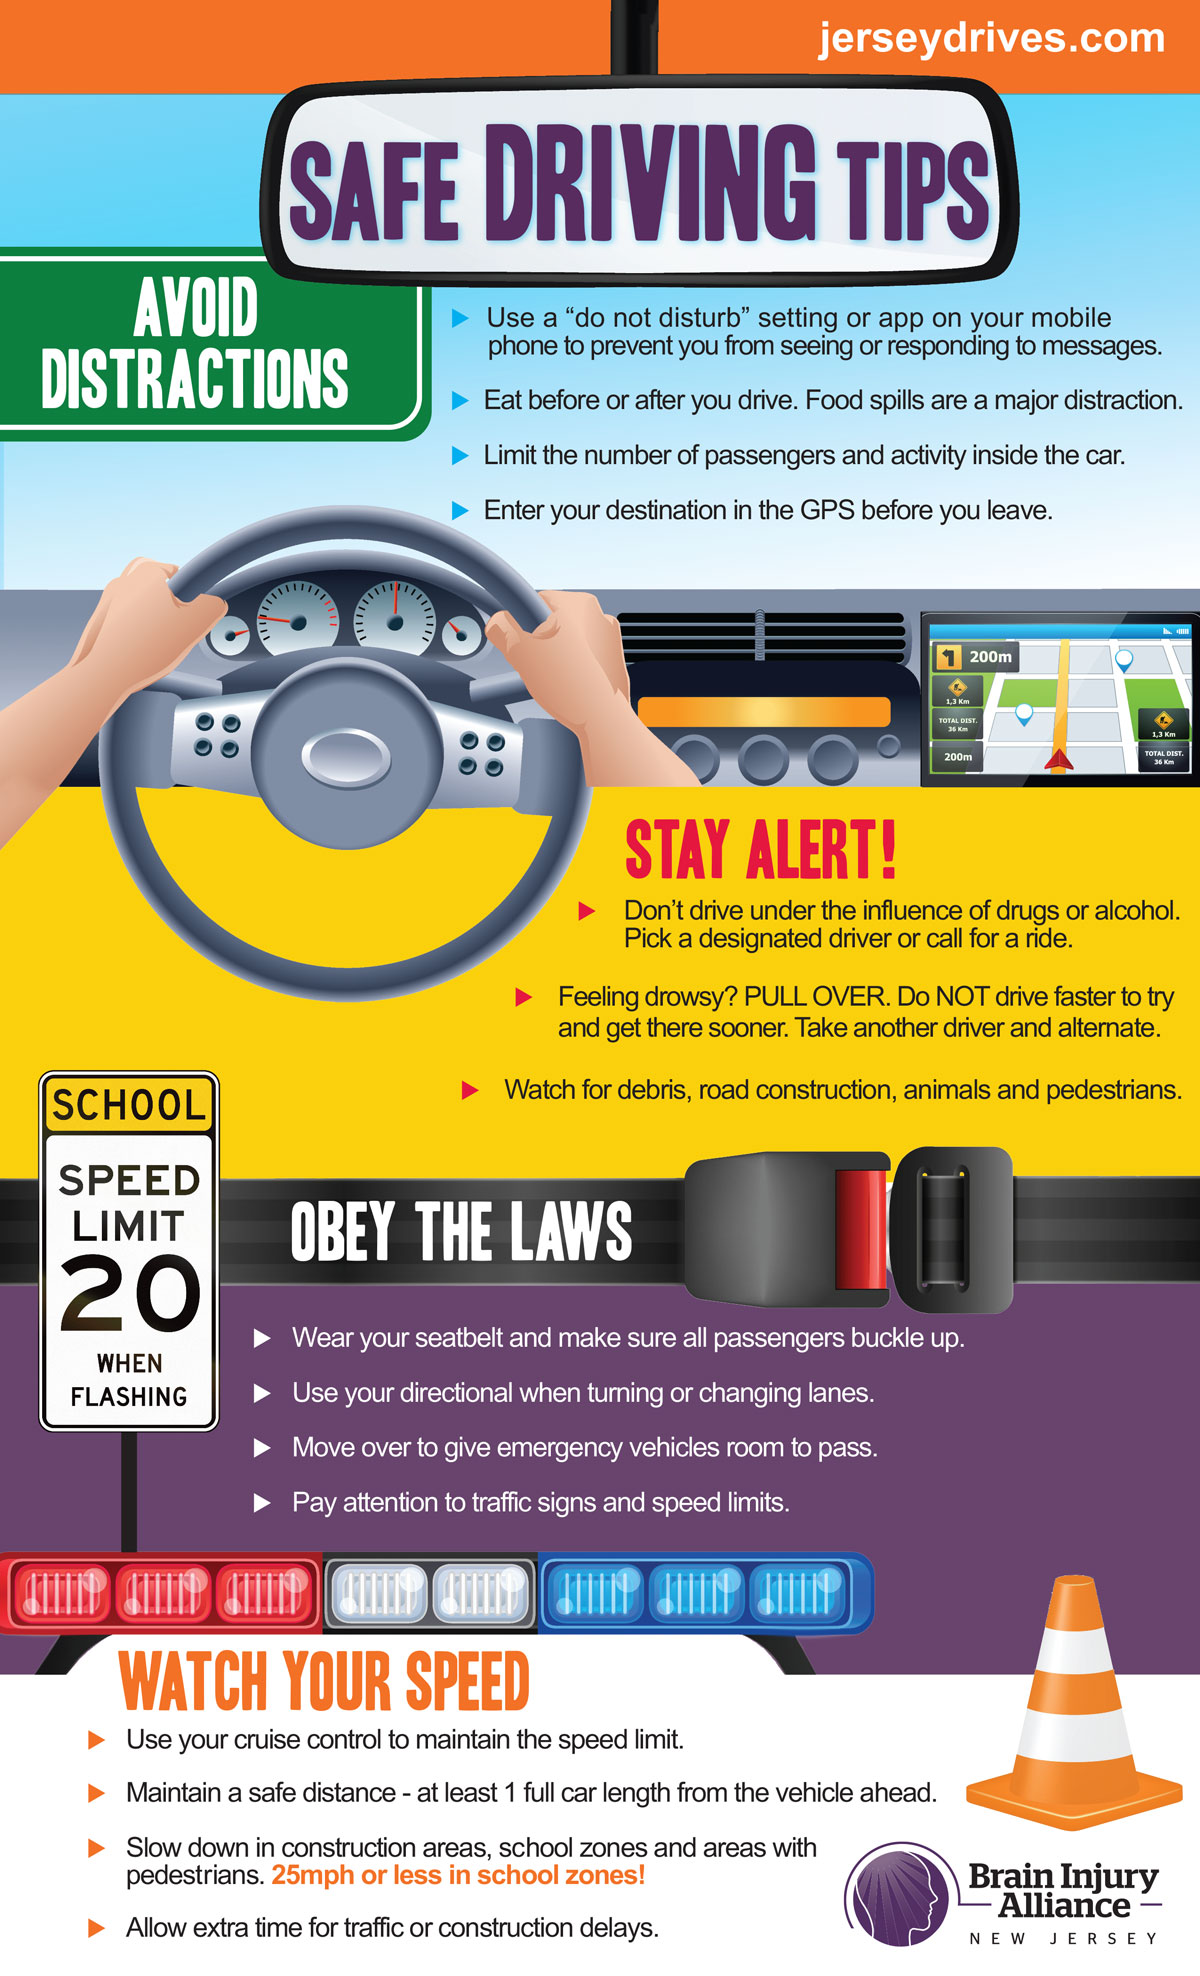 National Safety Month – Tips of the Week: Driver Safety